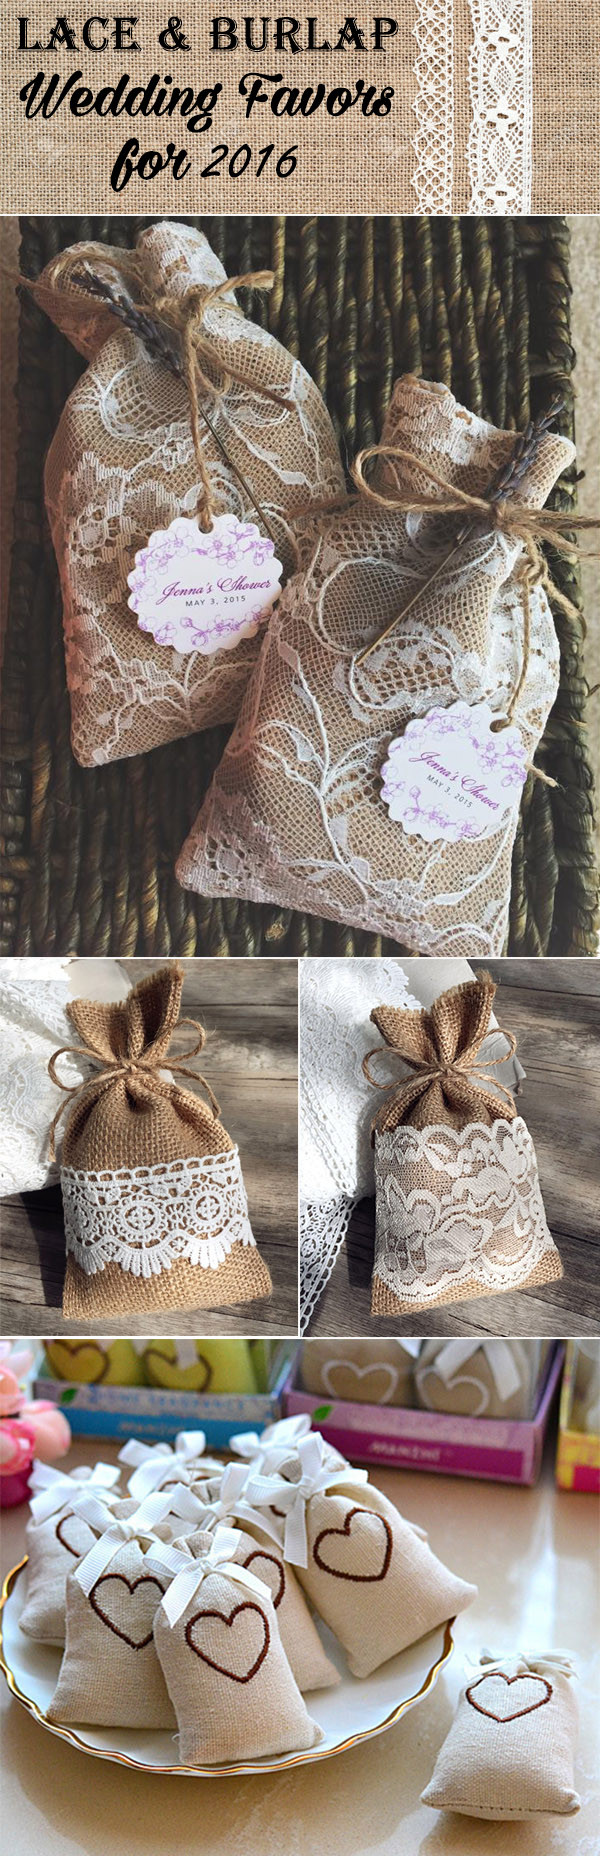 Country Themed Wedding Favors
 Top 20 Country Rustic Lace And Burlap Wedding Ideas